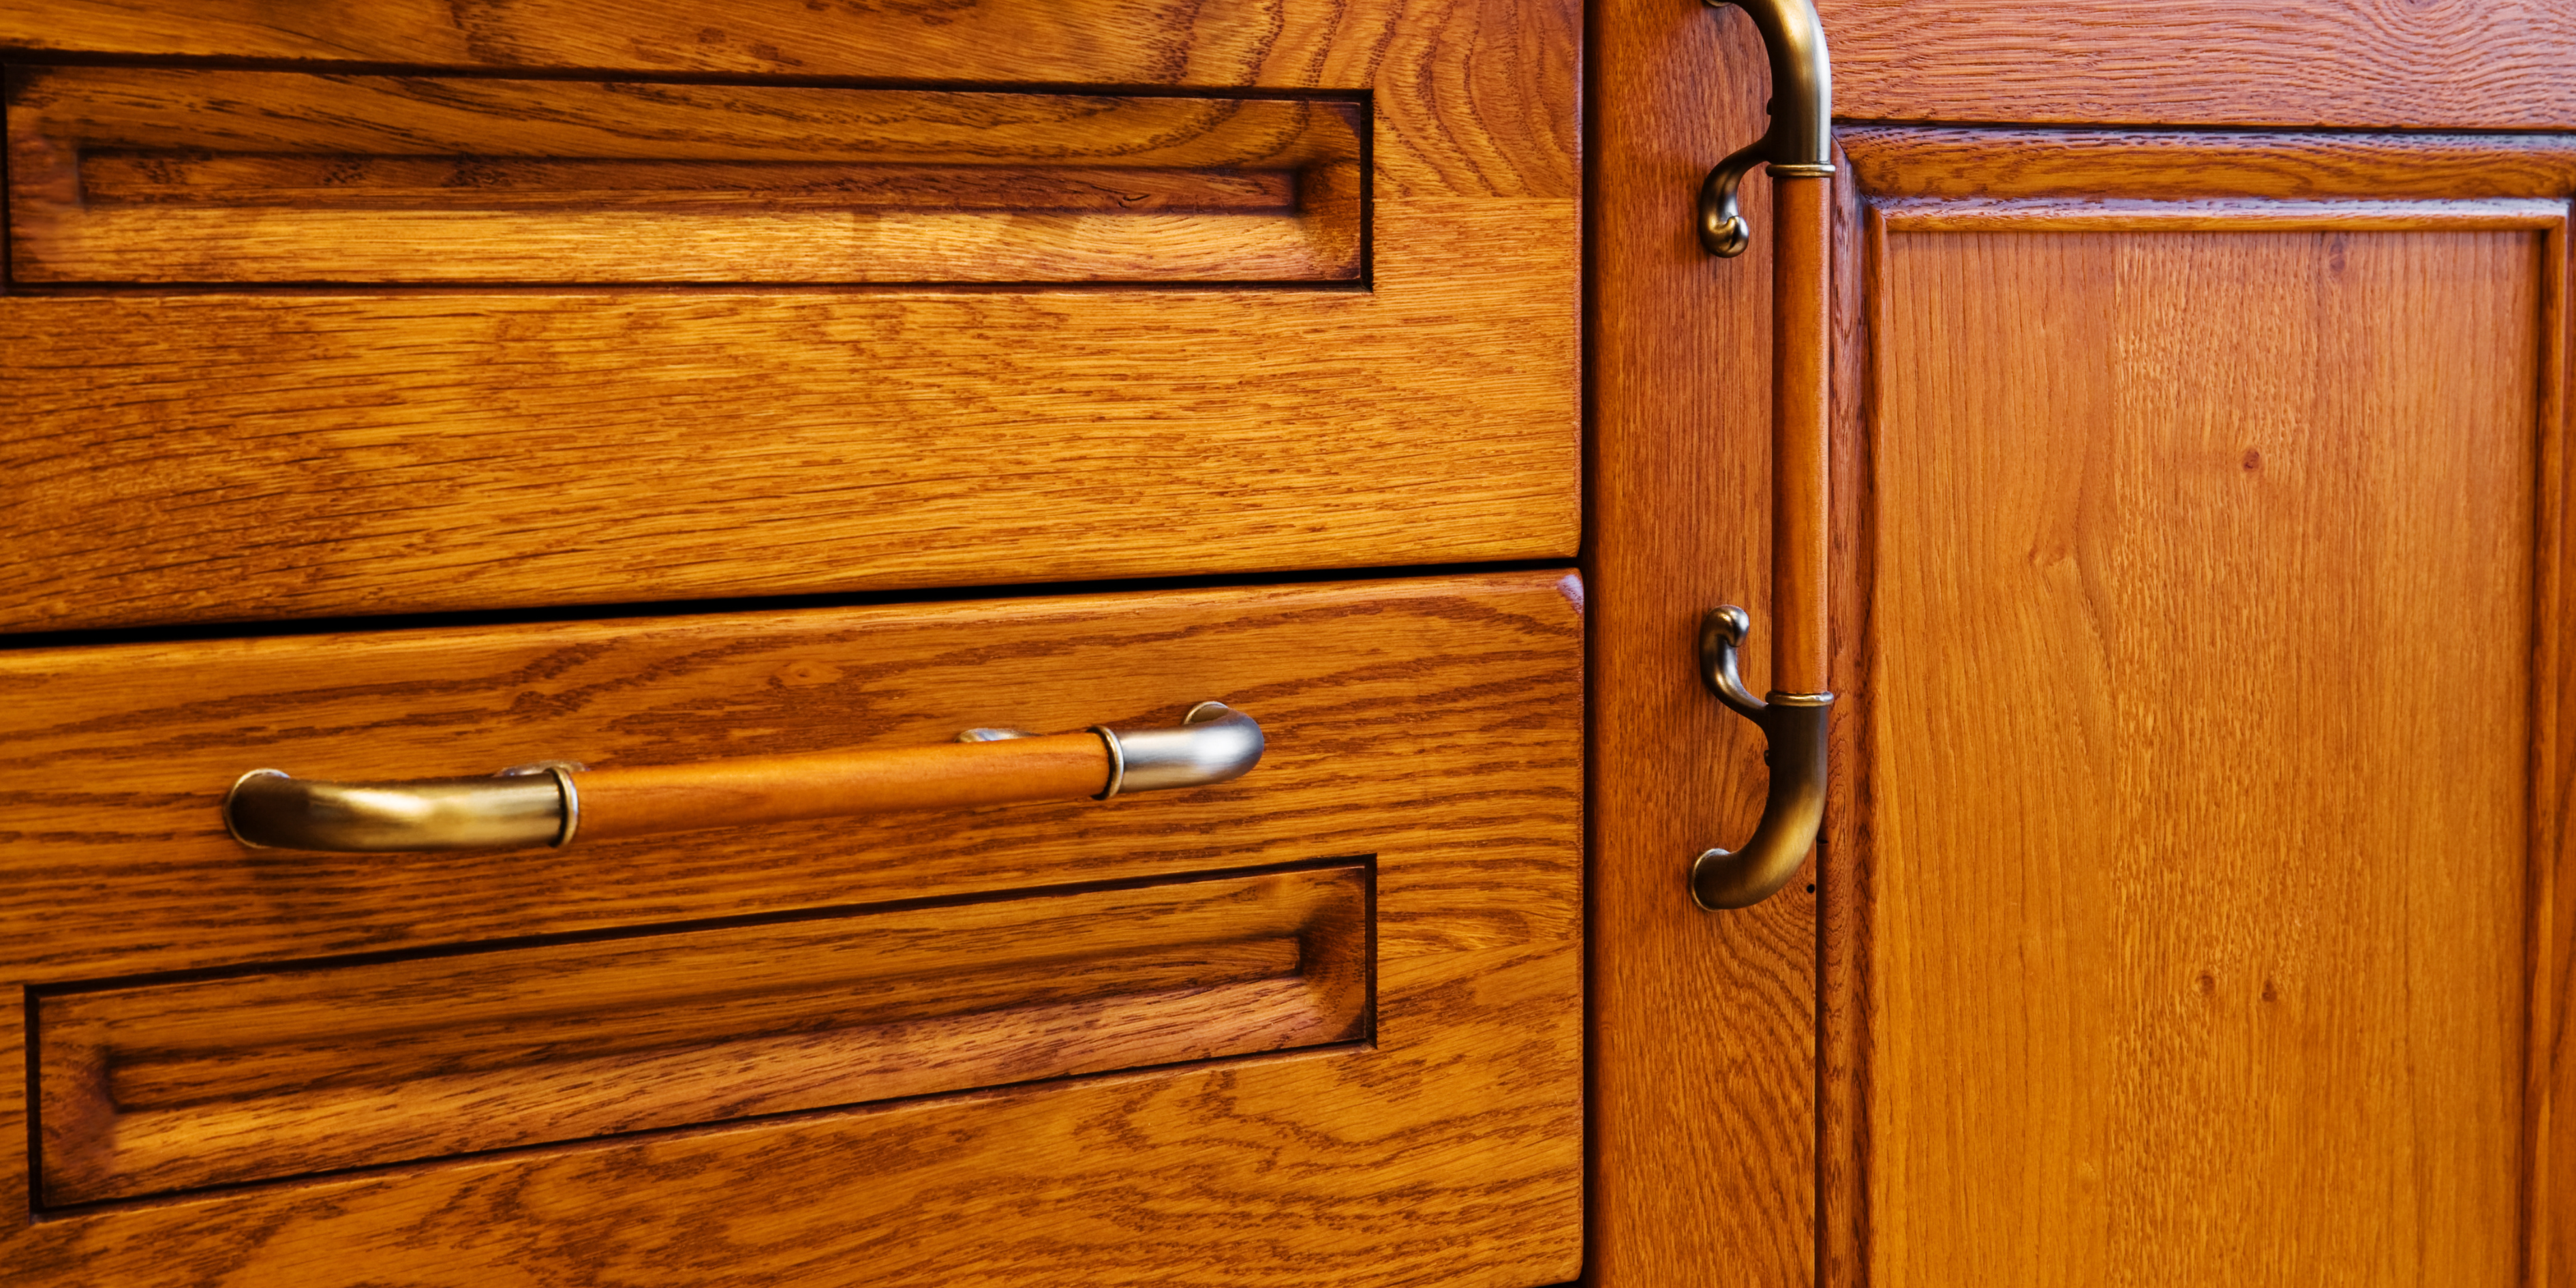 A close up picture of handles attached to wooden kitchen drawers and cupboards.